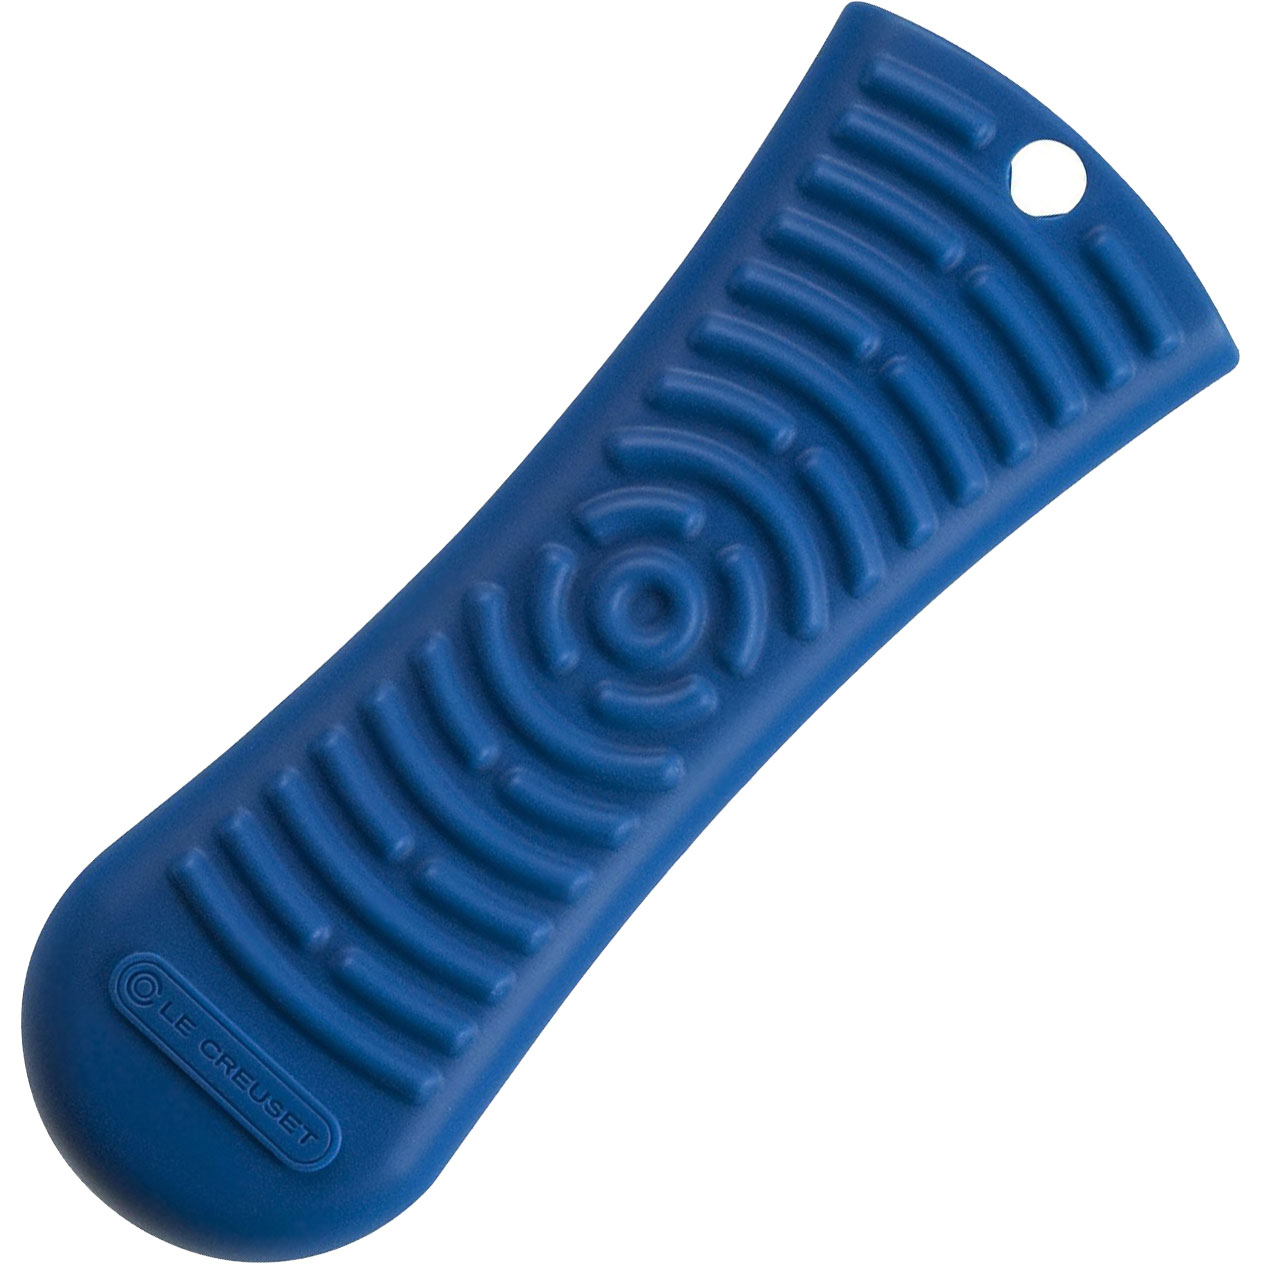 Le Creuset Silicone Cool Tool Handle Sleeve